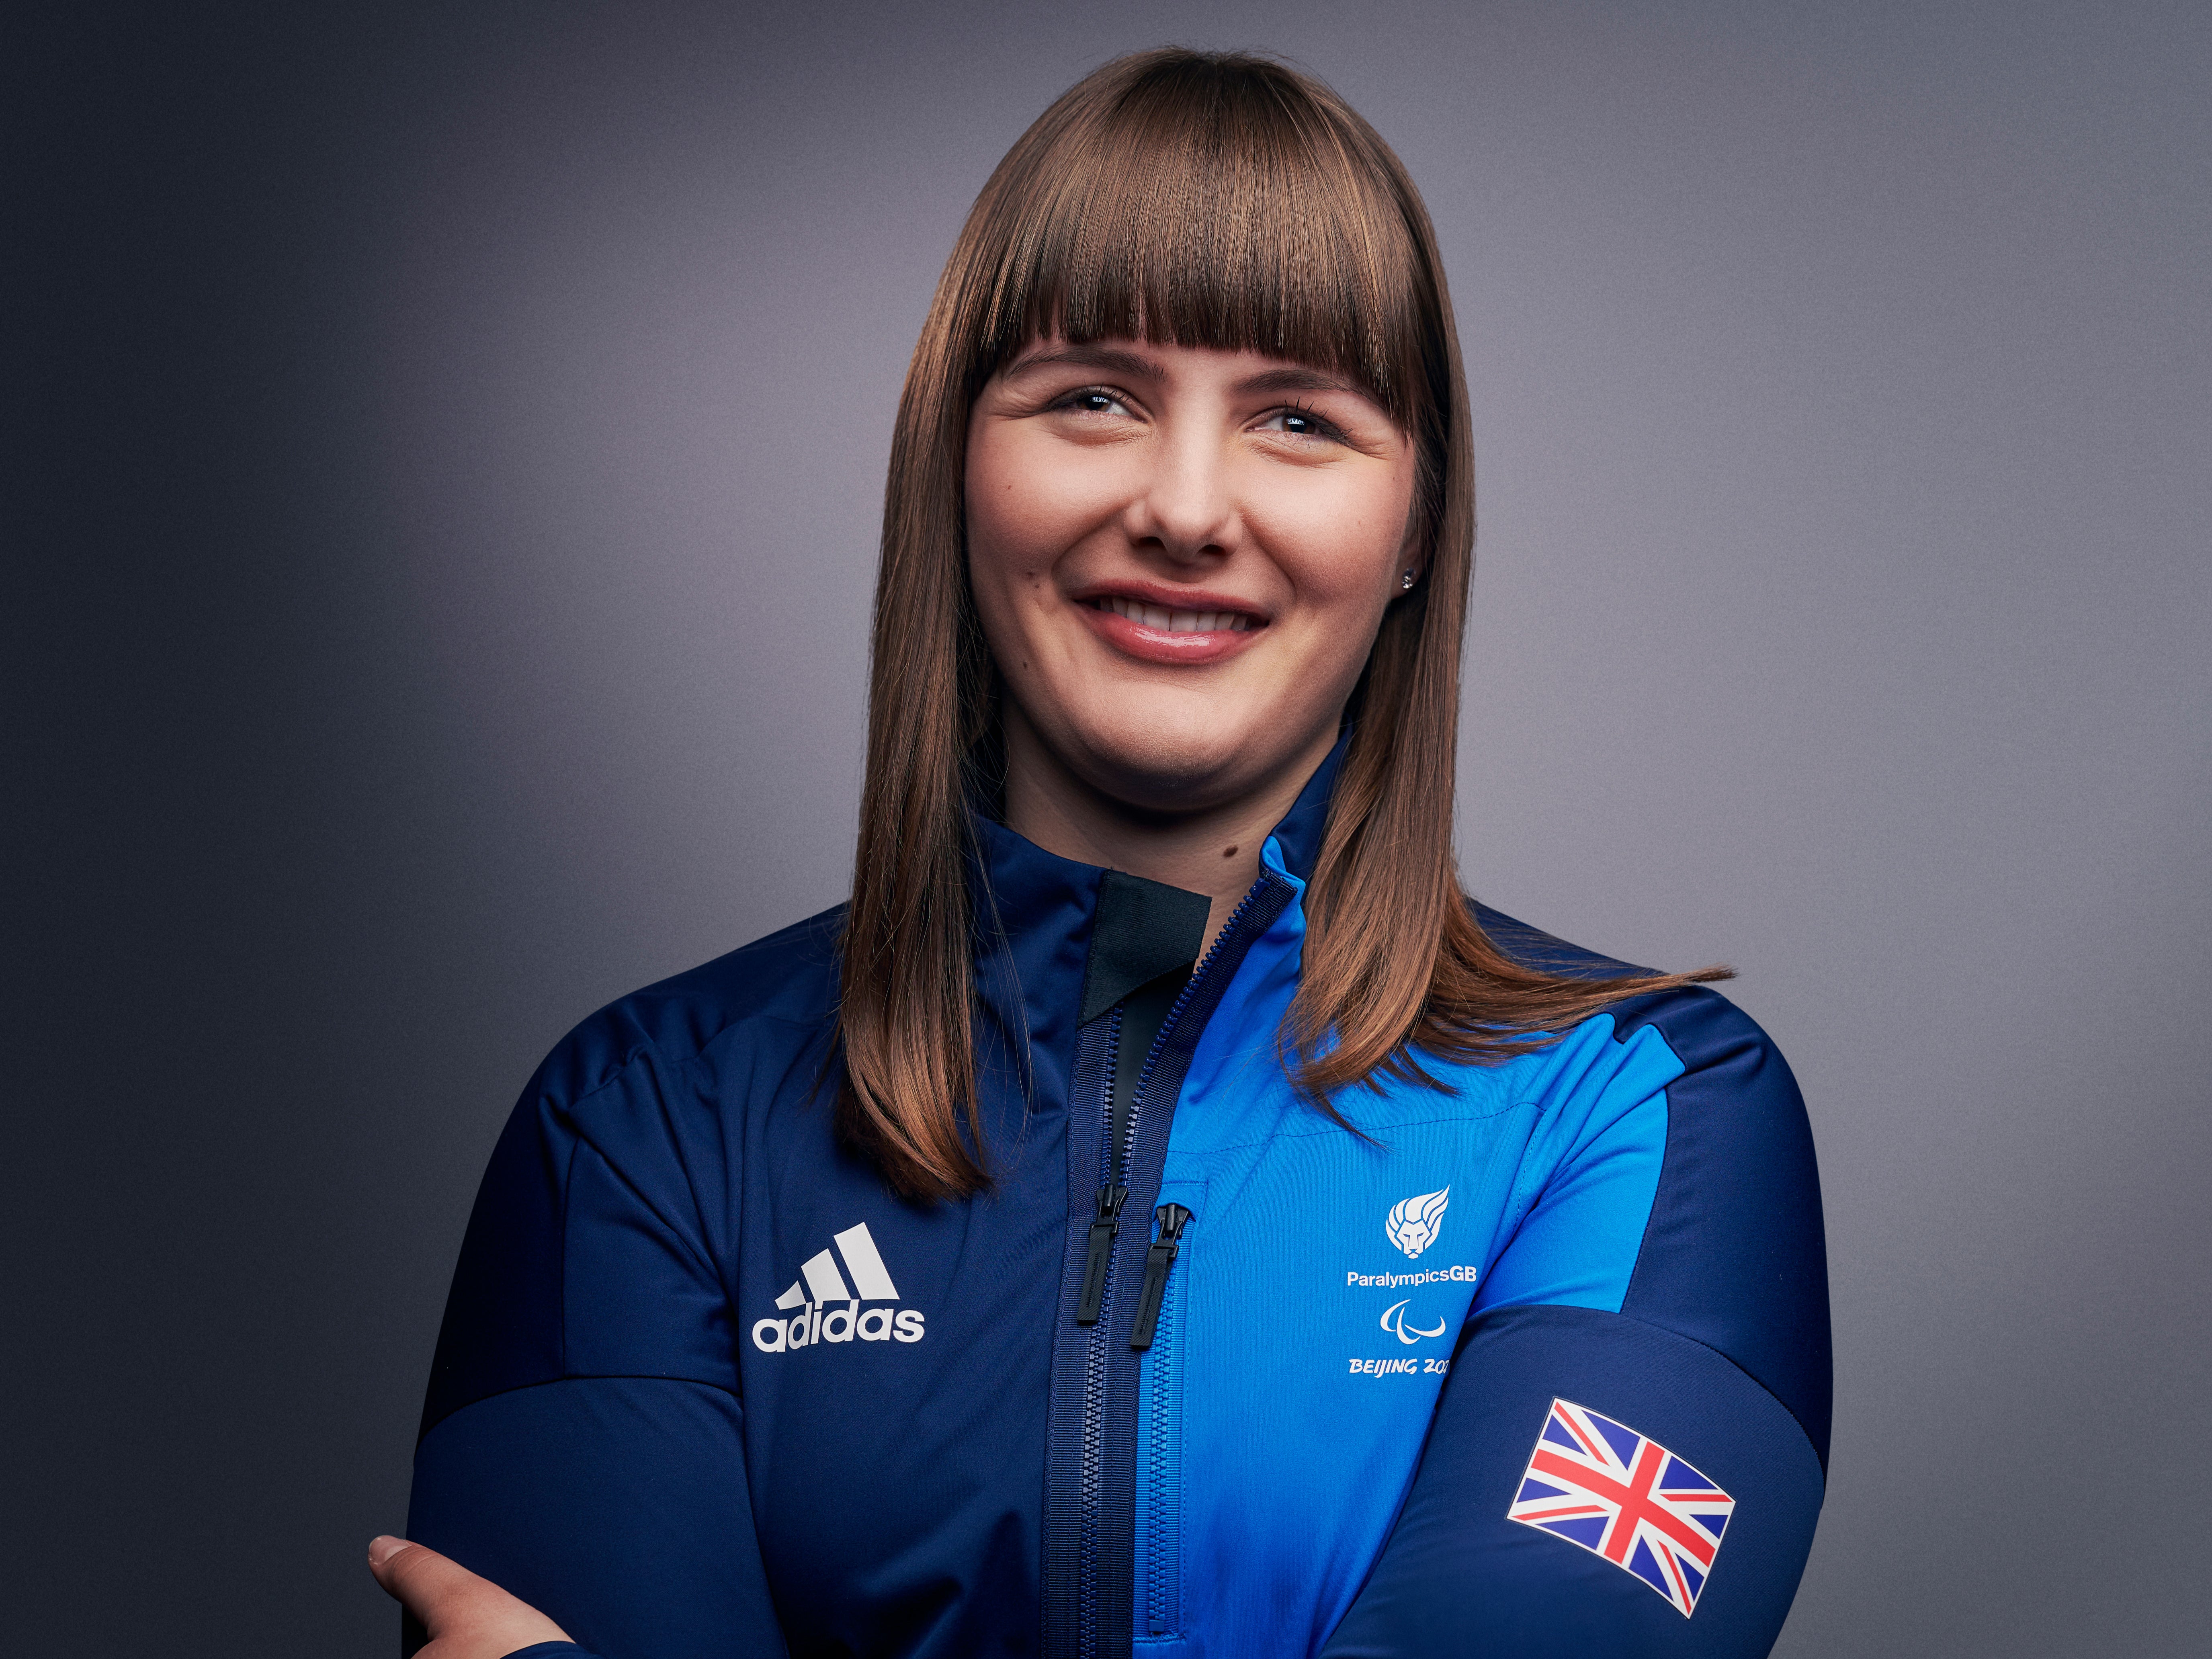 Three-time Paralympic medallist Millie Knight